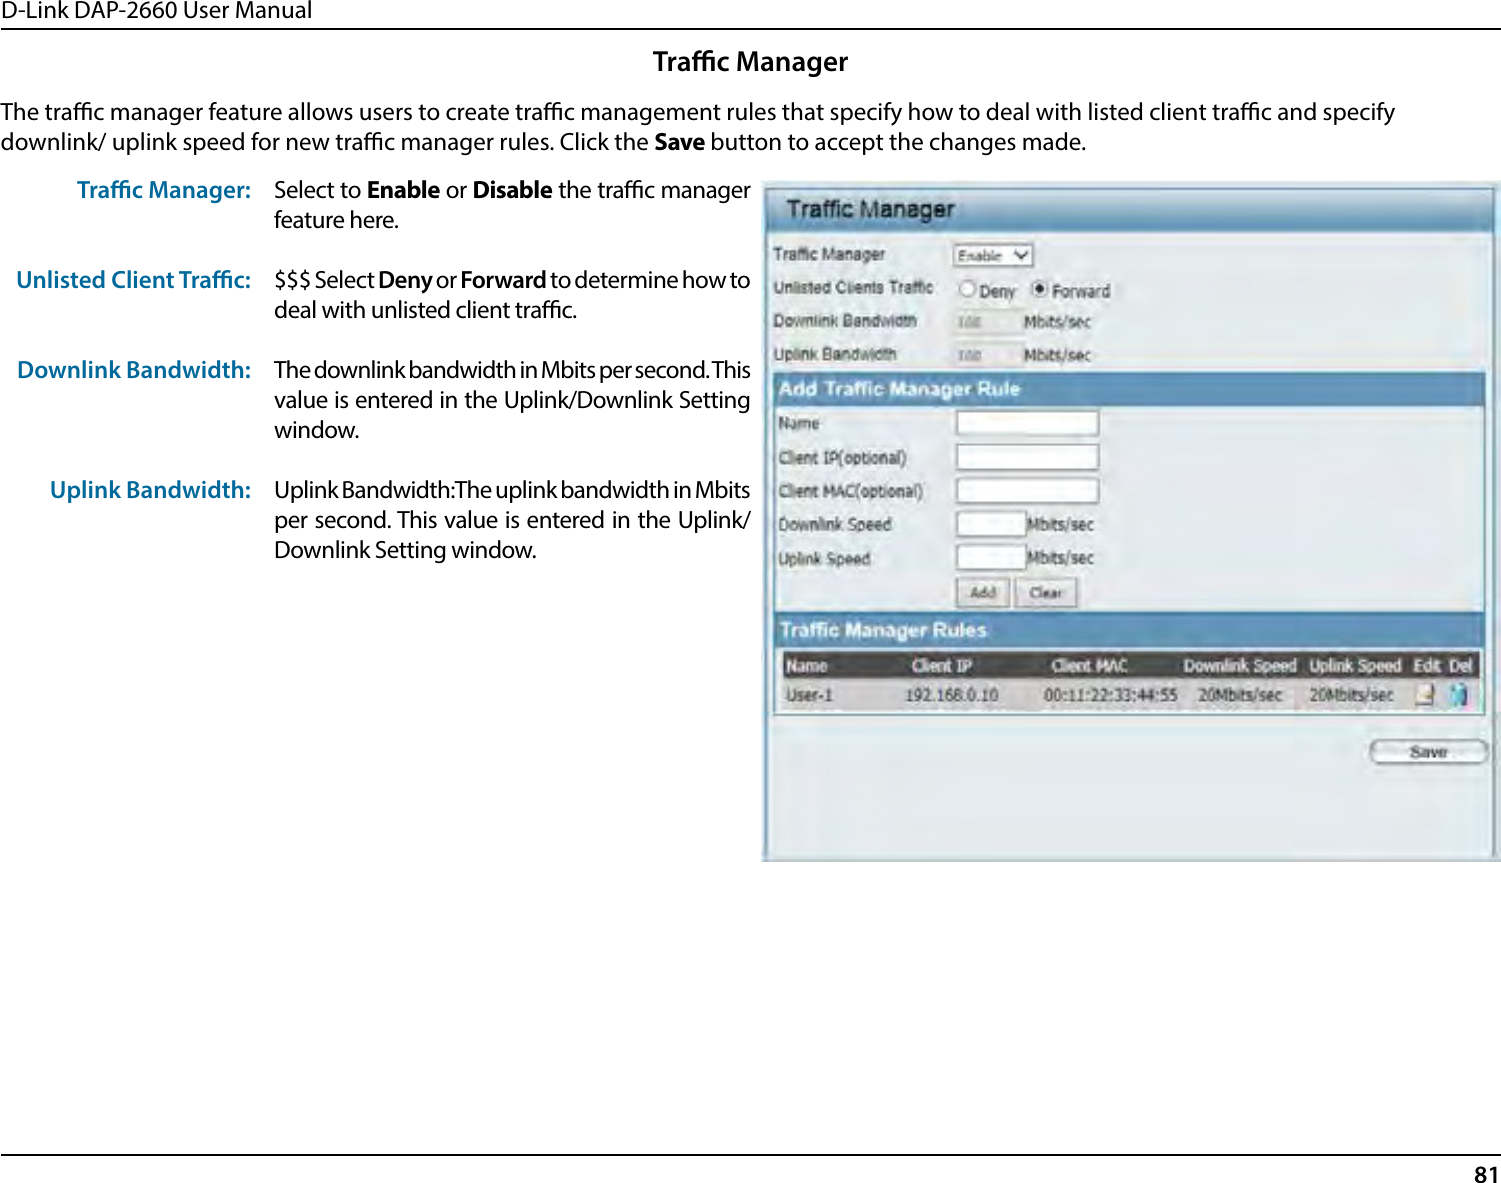 D-Link DAP-2660 User Manual81The trac manager feature allows users to create trac management rules that specify how to deal with listed client trac and specify downlink/ uplink speed for new trac manager rules. Click the Save button to accept the changes made.Trac Manager: Unlisted Client Trac: Downlink Bandwidth: Uplink Bandwidth:Select to Enable or Disable the trac manager feature here.$$$ Select Deny or Forward to determine how to deal with unlisted client trac. The downlink bandwidth in Mbits per second. This value is entered in the Uplink/Downlink Setting window. Uplink Bandwidth:The uplink bandwidth in Mbits per second. This value is entered in the Uplink/Downlink Setting window.Trac Manager